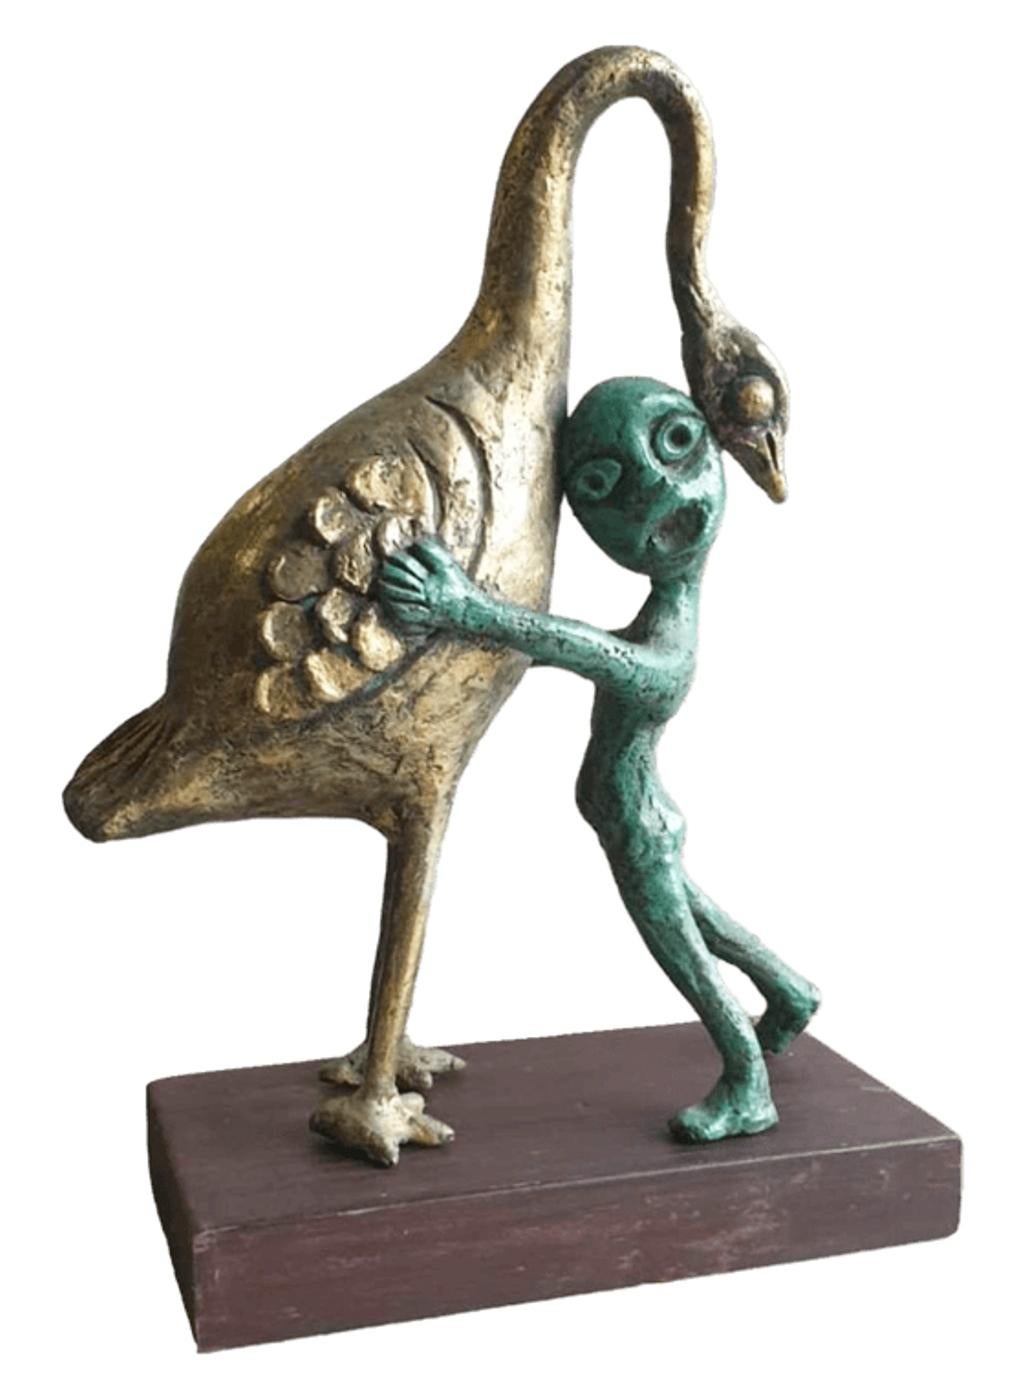 Subrata Biswas Figurative Sculpture - Innocent Life, Figurative Bronze by Contemporary Indian Artist "In Stock"